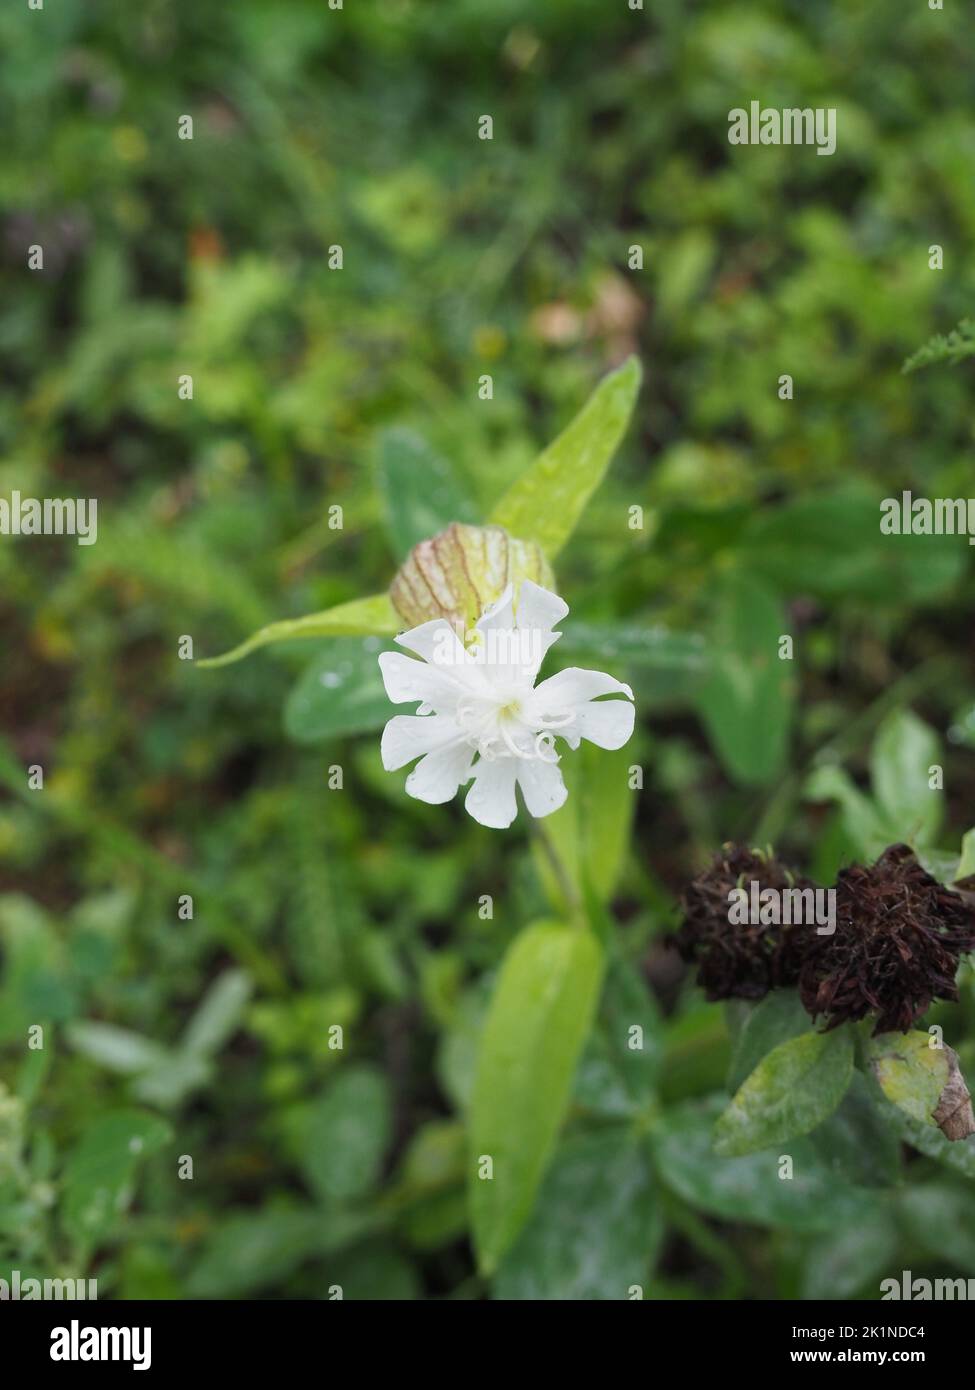 Silene vulgaris, the bladder campion or maiden tears, is a plant species of the genus Silene of the family Caryophyllaceae. A common wildflower in mea Stock Photo